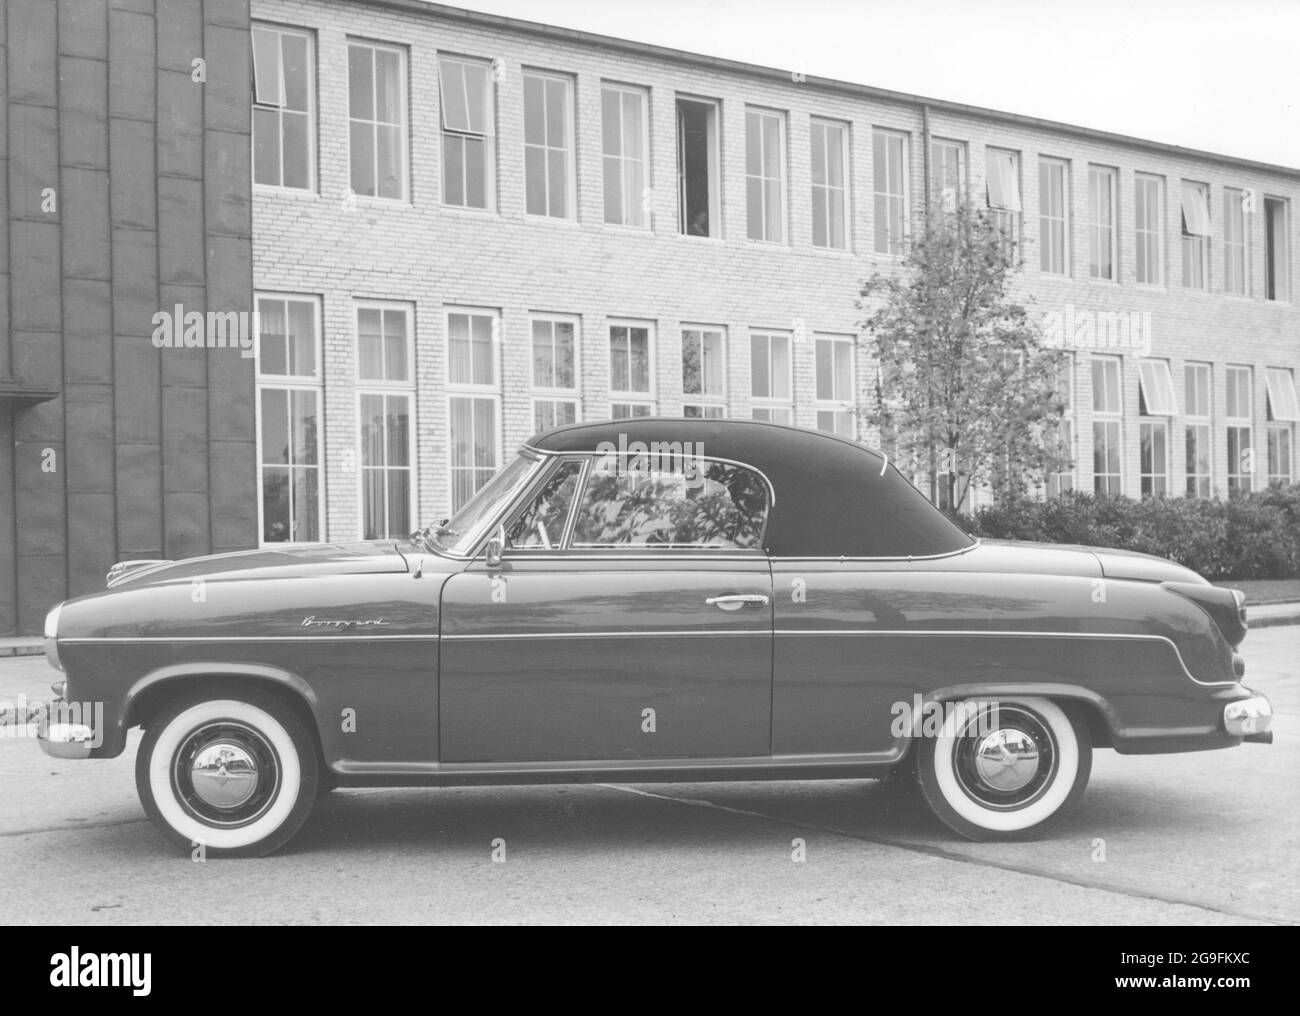 Transport, Auto, Borgward Isabella Cabrio, Deutschland, 1955, ADDITIONAL-RIGHTS-CLEARANCE-INFO-NOT-AVAILABLE Stockfoto